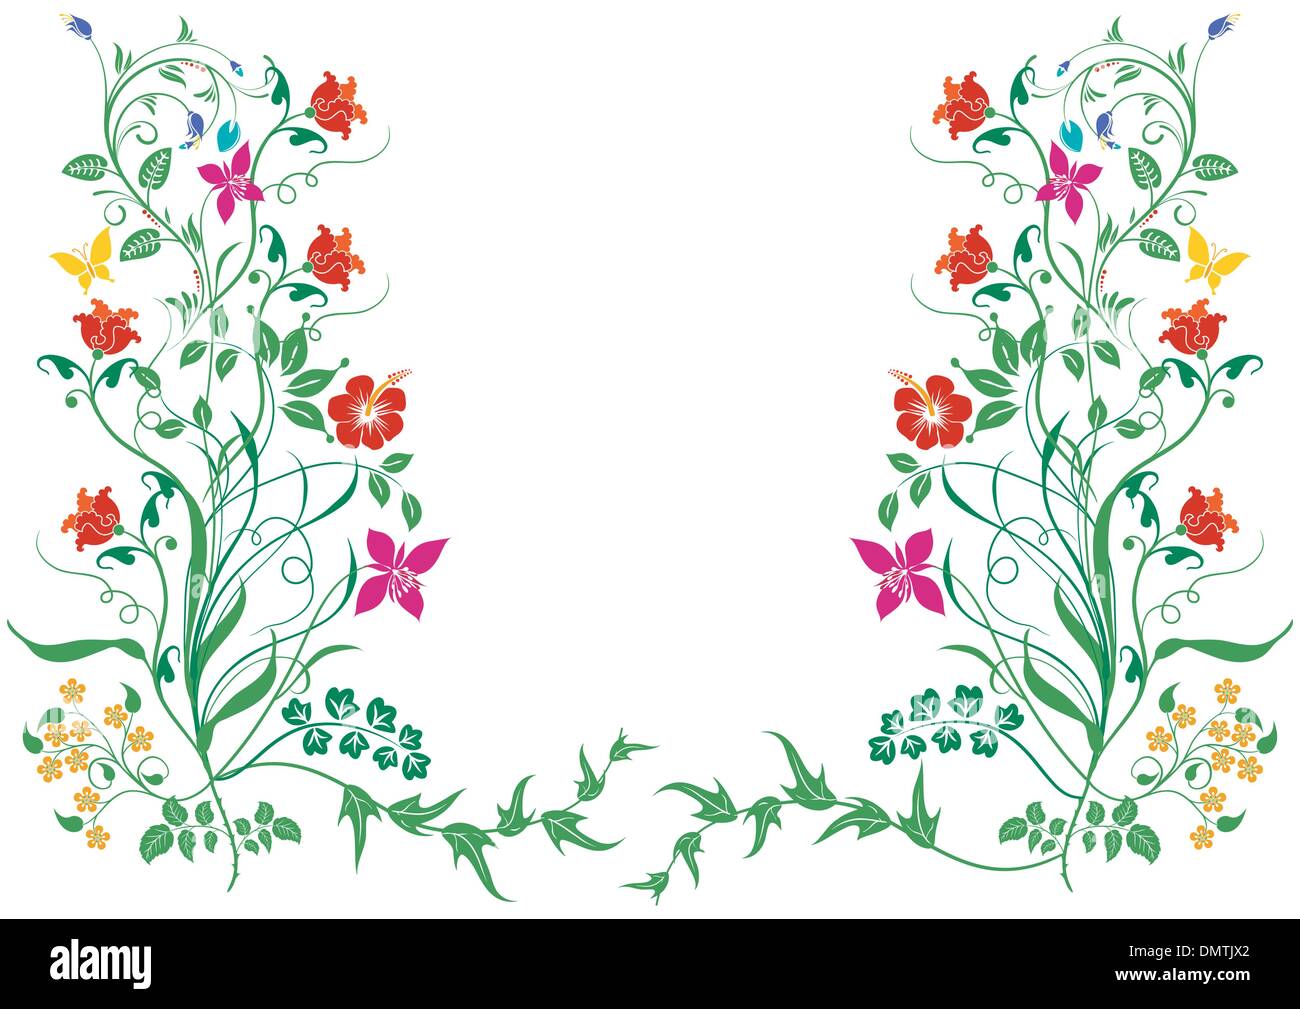 Flowers and Plants Stock Vector